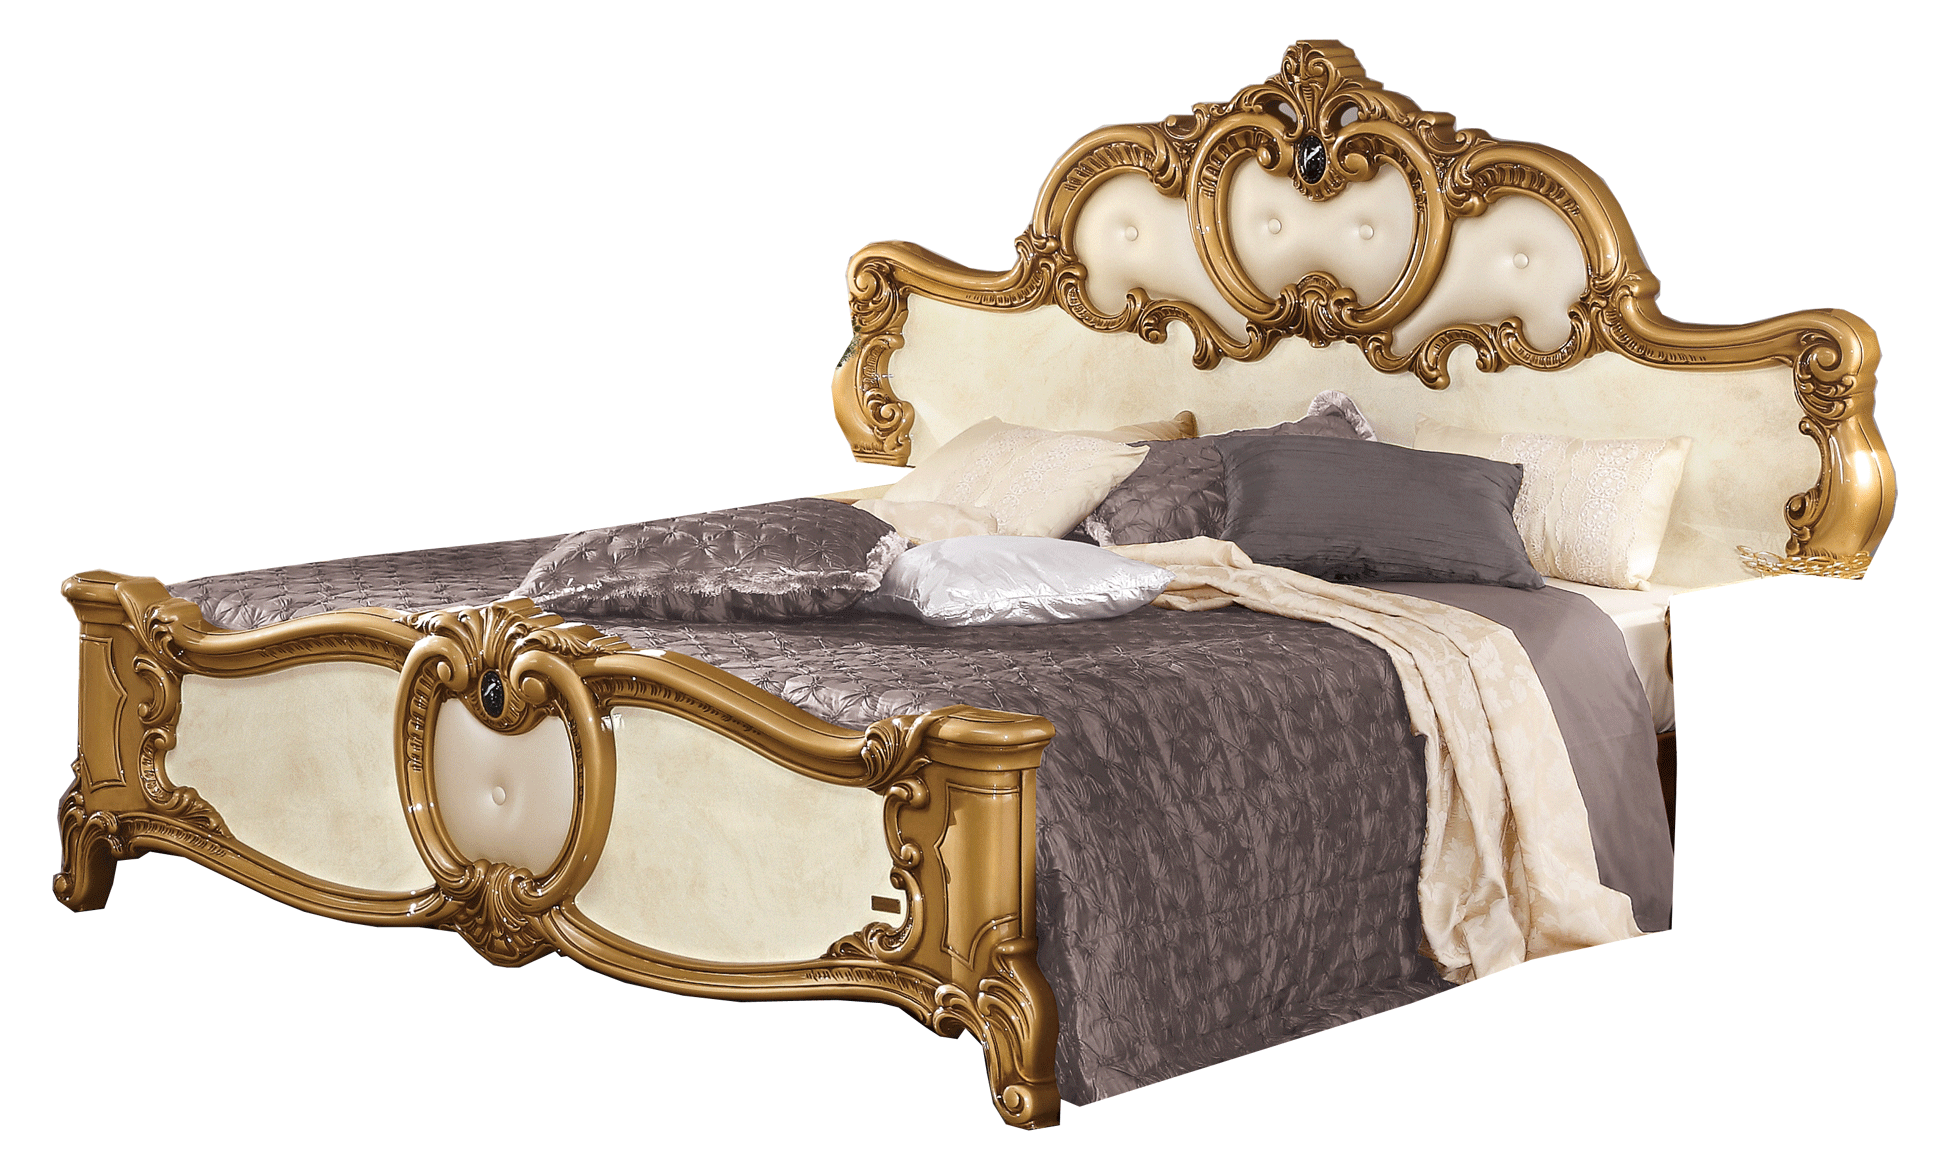 Bedroom Furniture Dressers and Chests Barocco Bed Ivory w/Gold, Camelgroup Italy